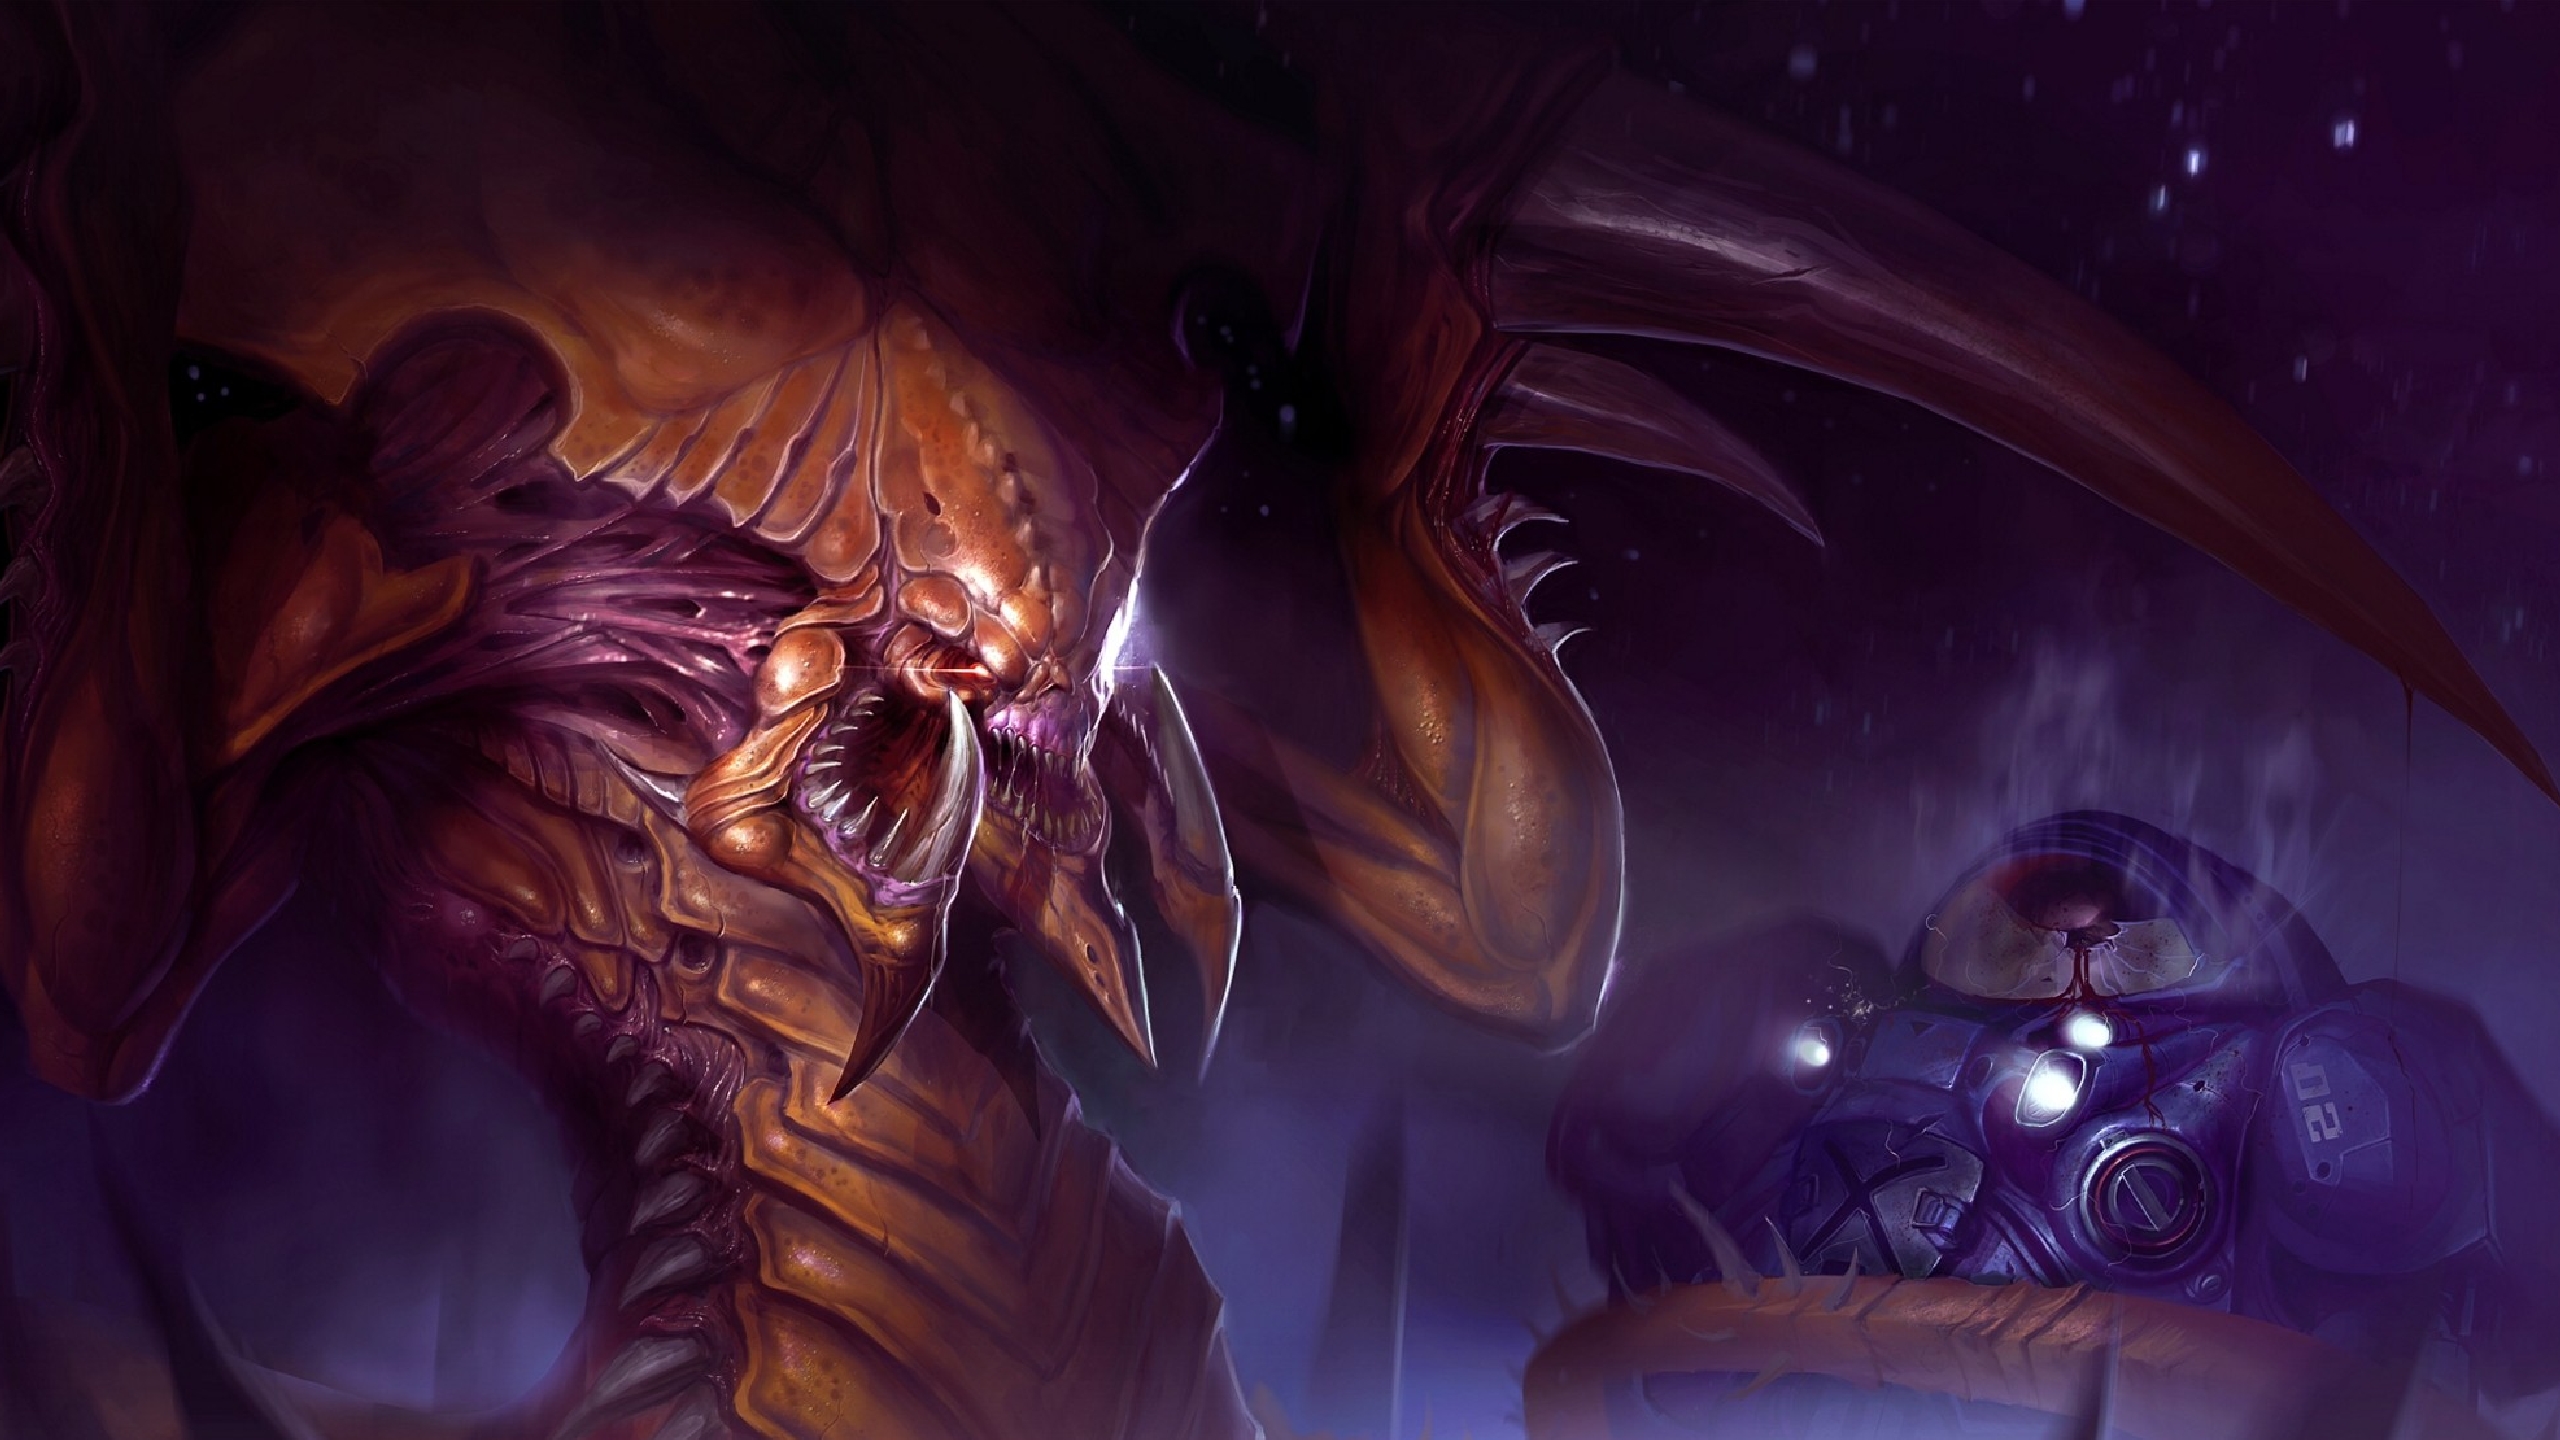 Video Game StarCraft Ii Heart Of The Swarm 2560x1440